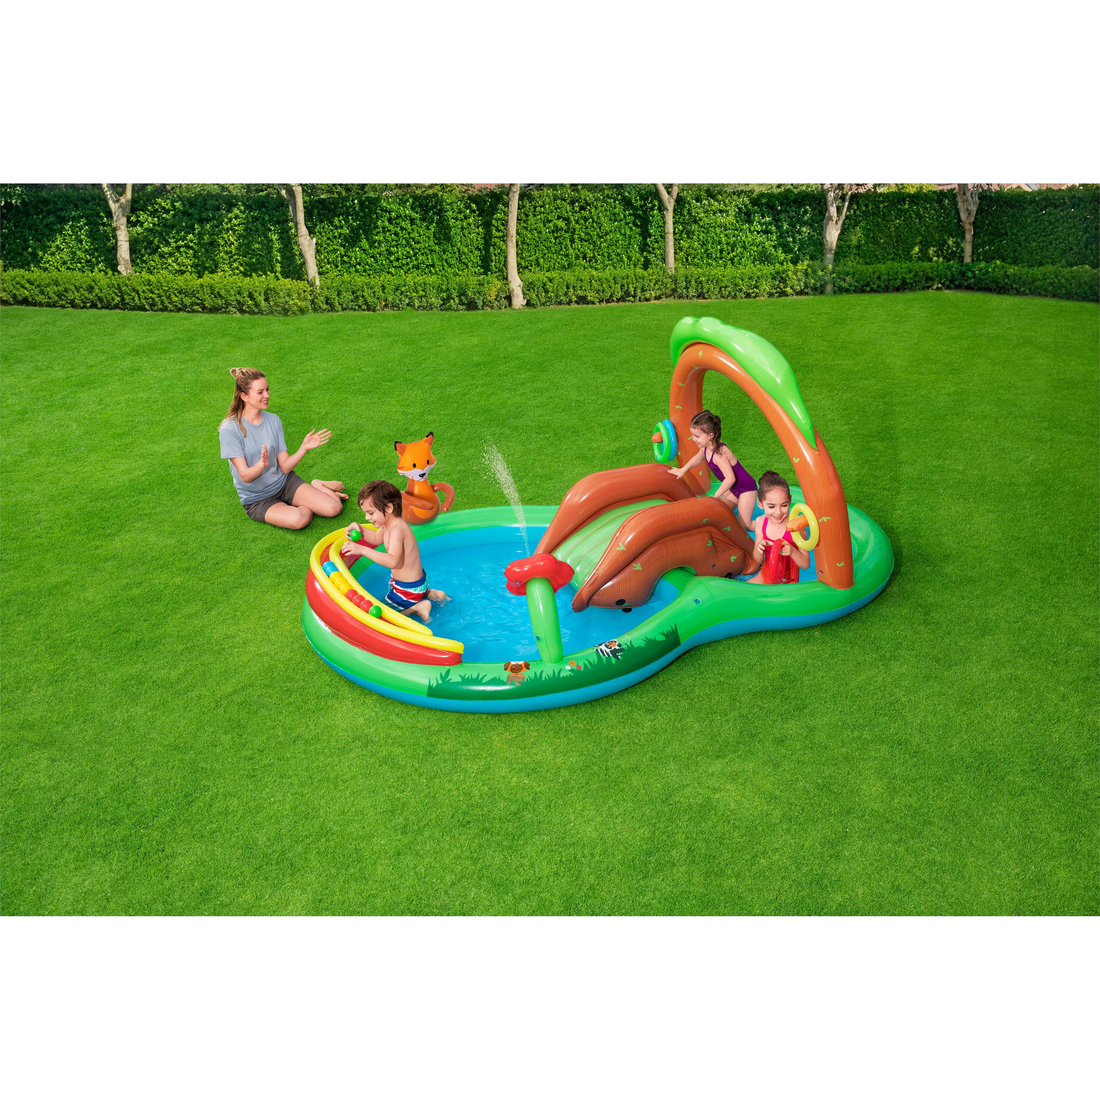 INFLATABLE PLAY POOL 2.95M X 1.99M X 1.30M - best price from Maltashopper.com BR500012651